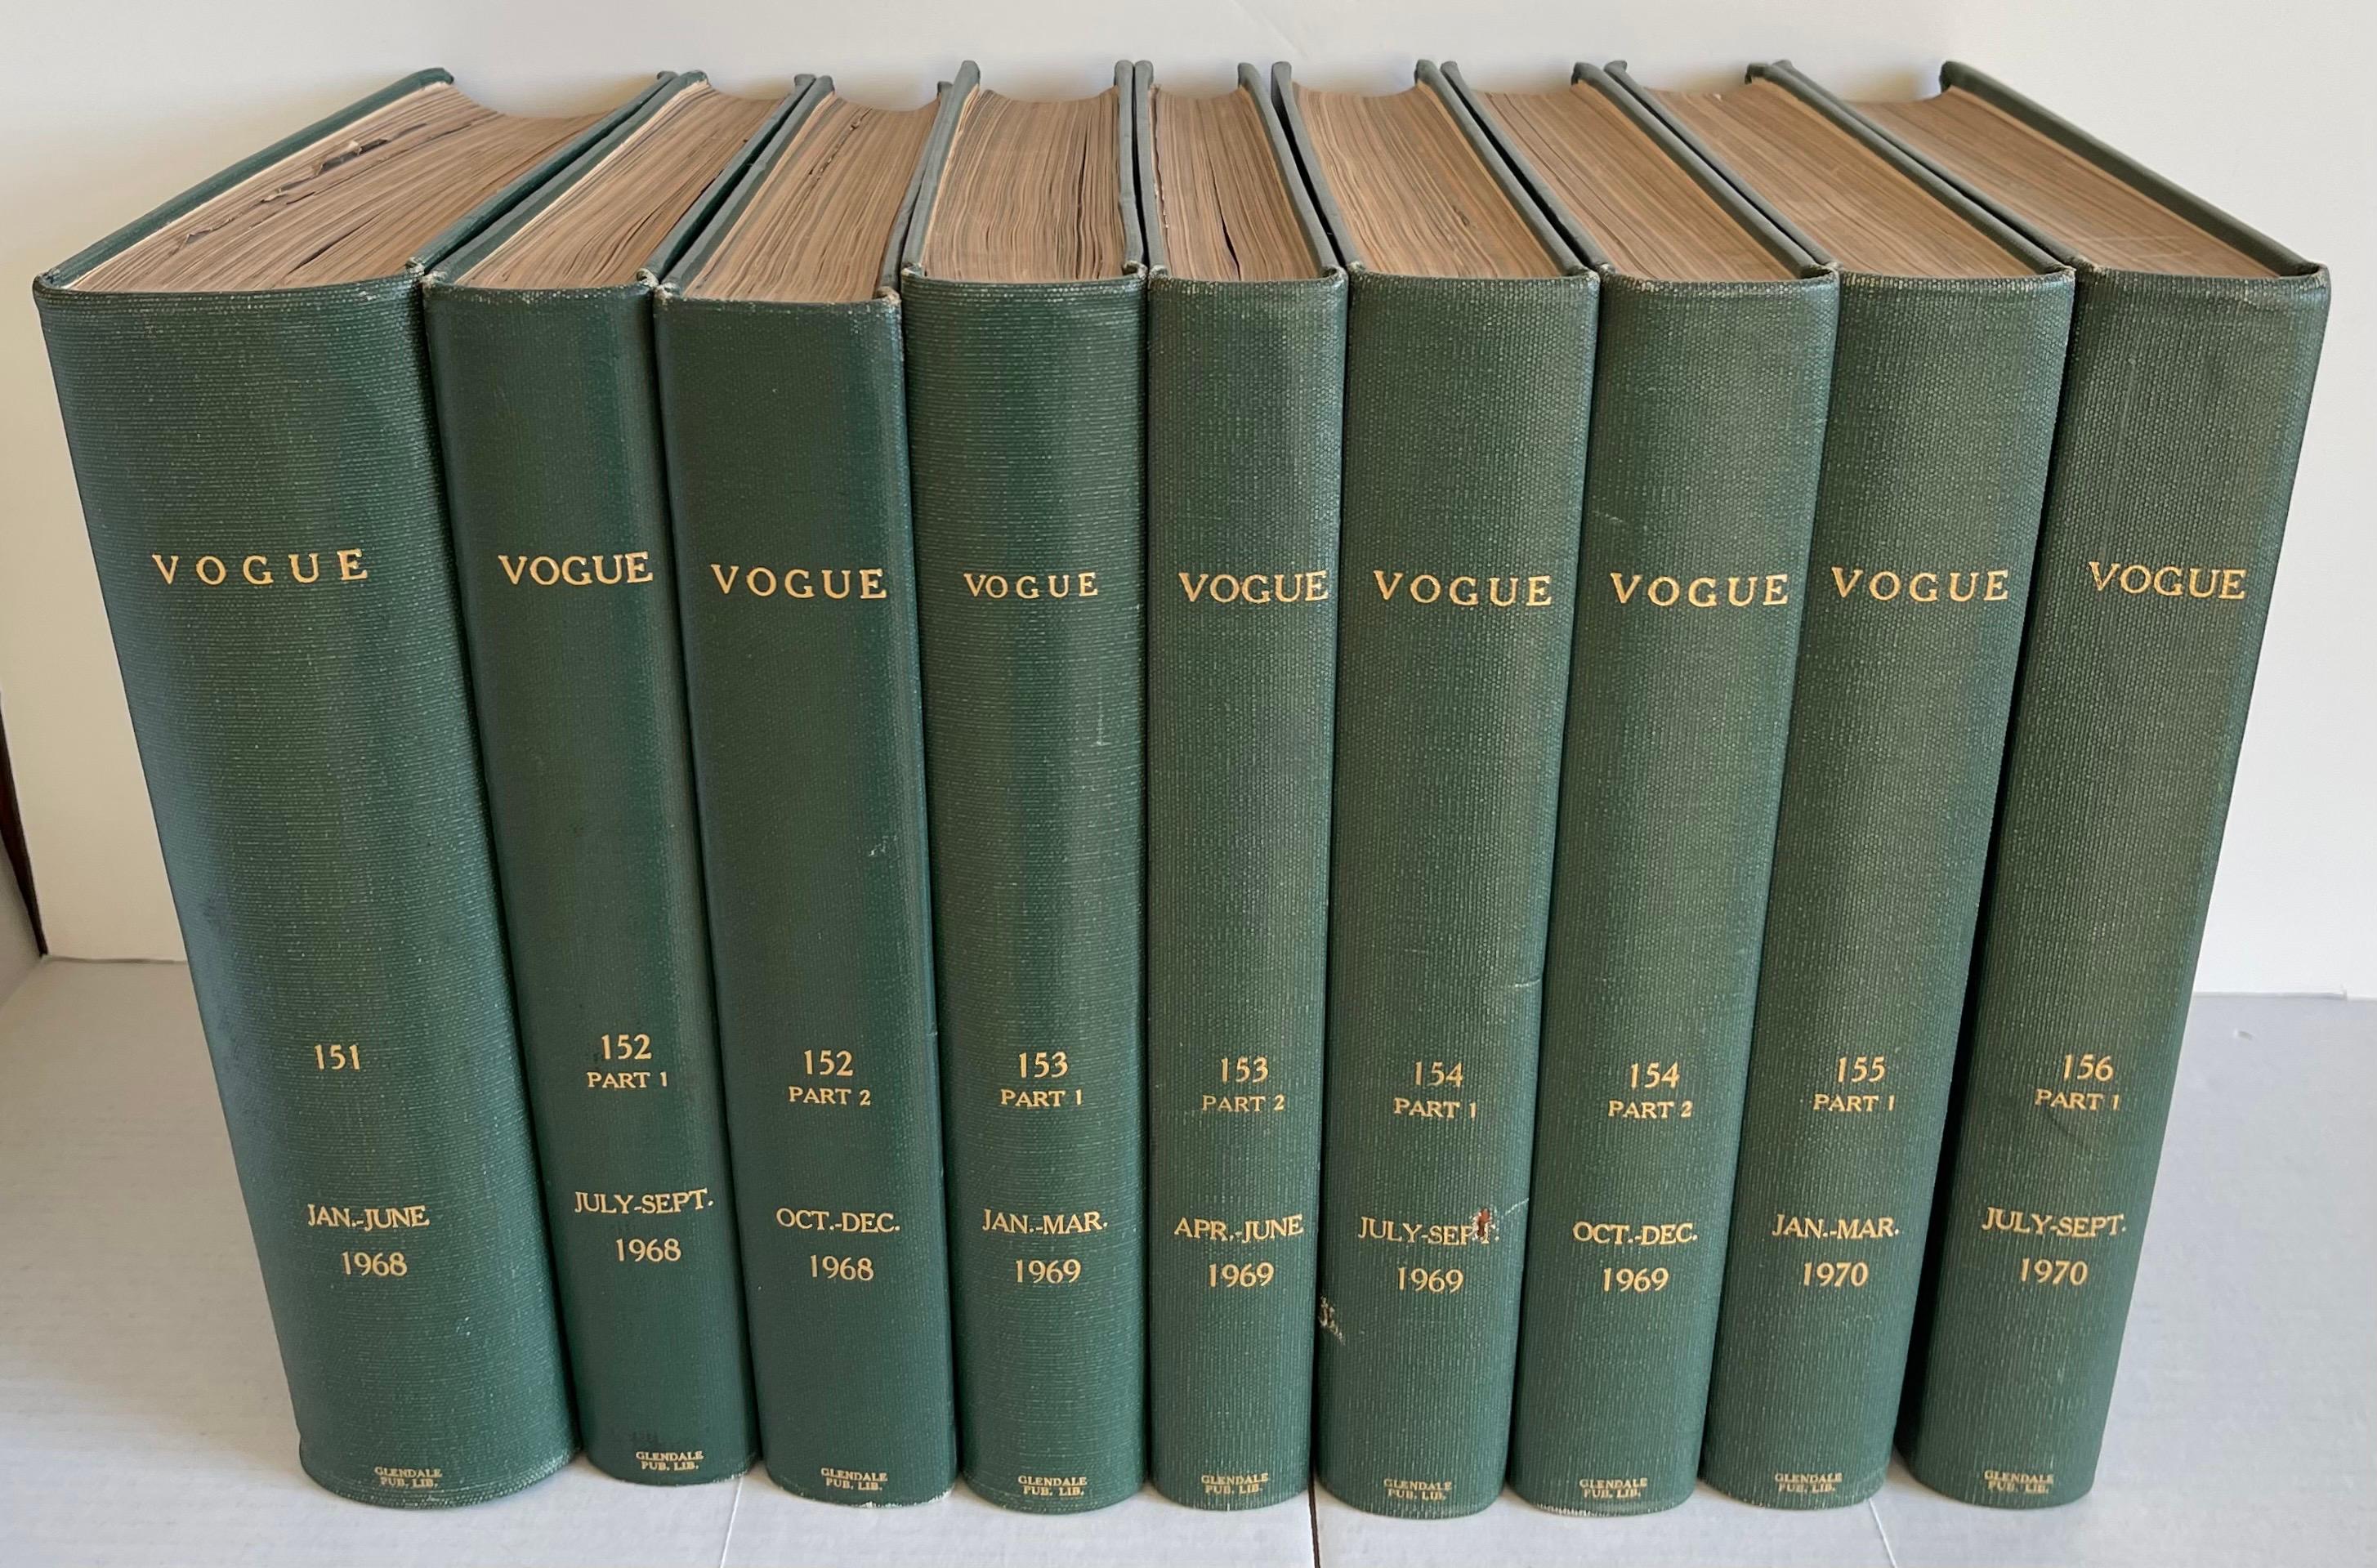 Set of nine hardcover cloth bound ex-libris Vogue magazines from 1968-1970. Dark green cloth binding with gold embossed lettering. 
Featuring many iconic covers and editorials from Diana Vreeland Vogue years. 

Edition 151 January-June 1968, edition